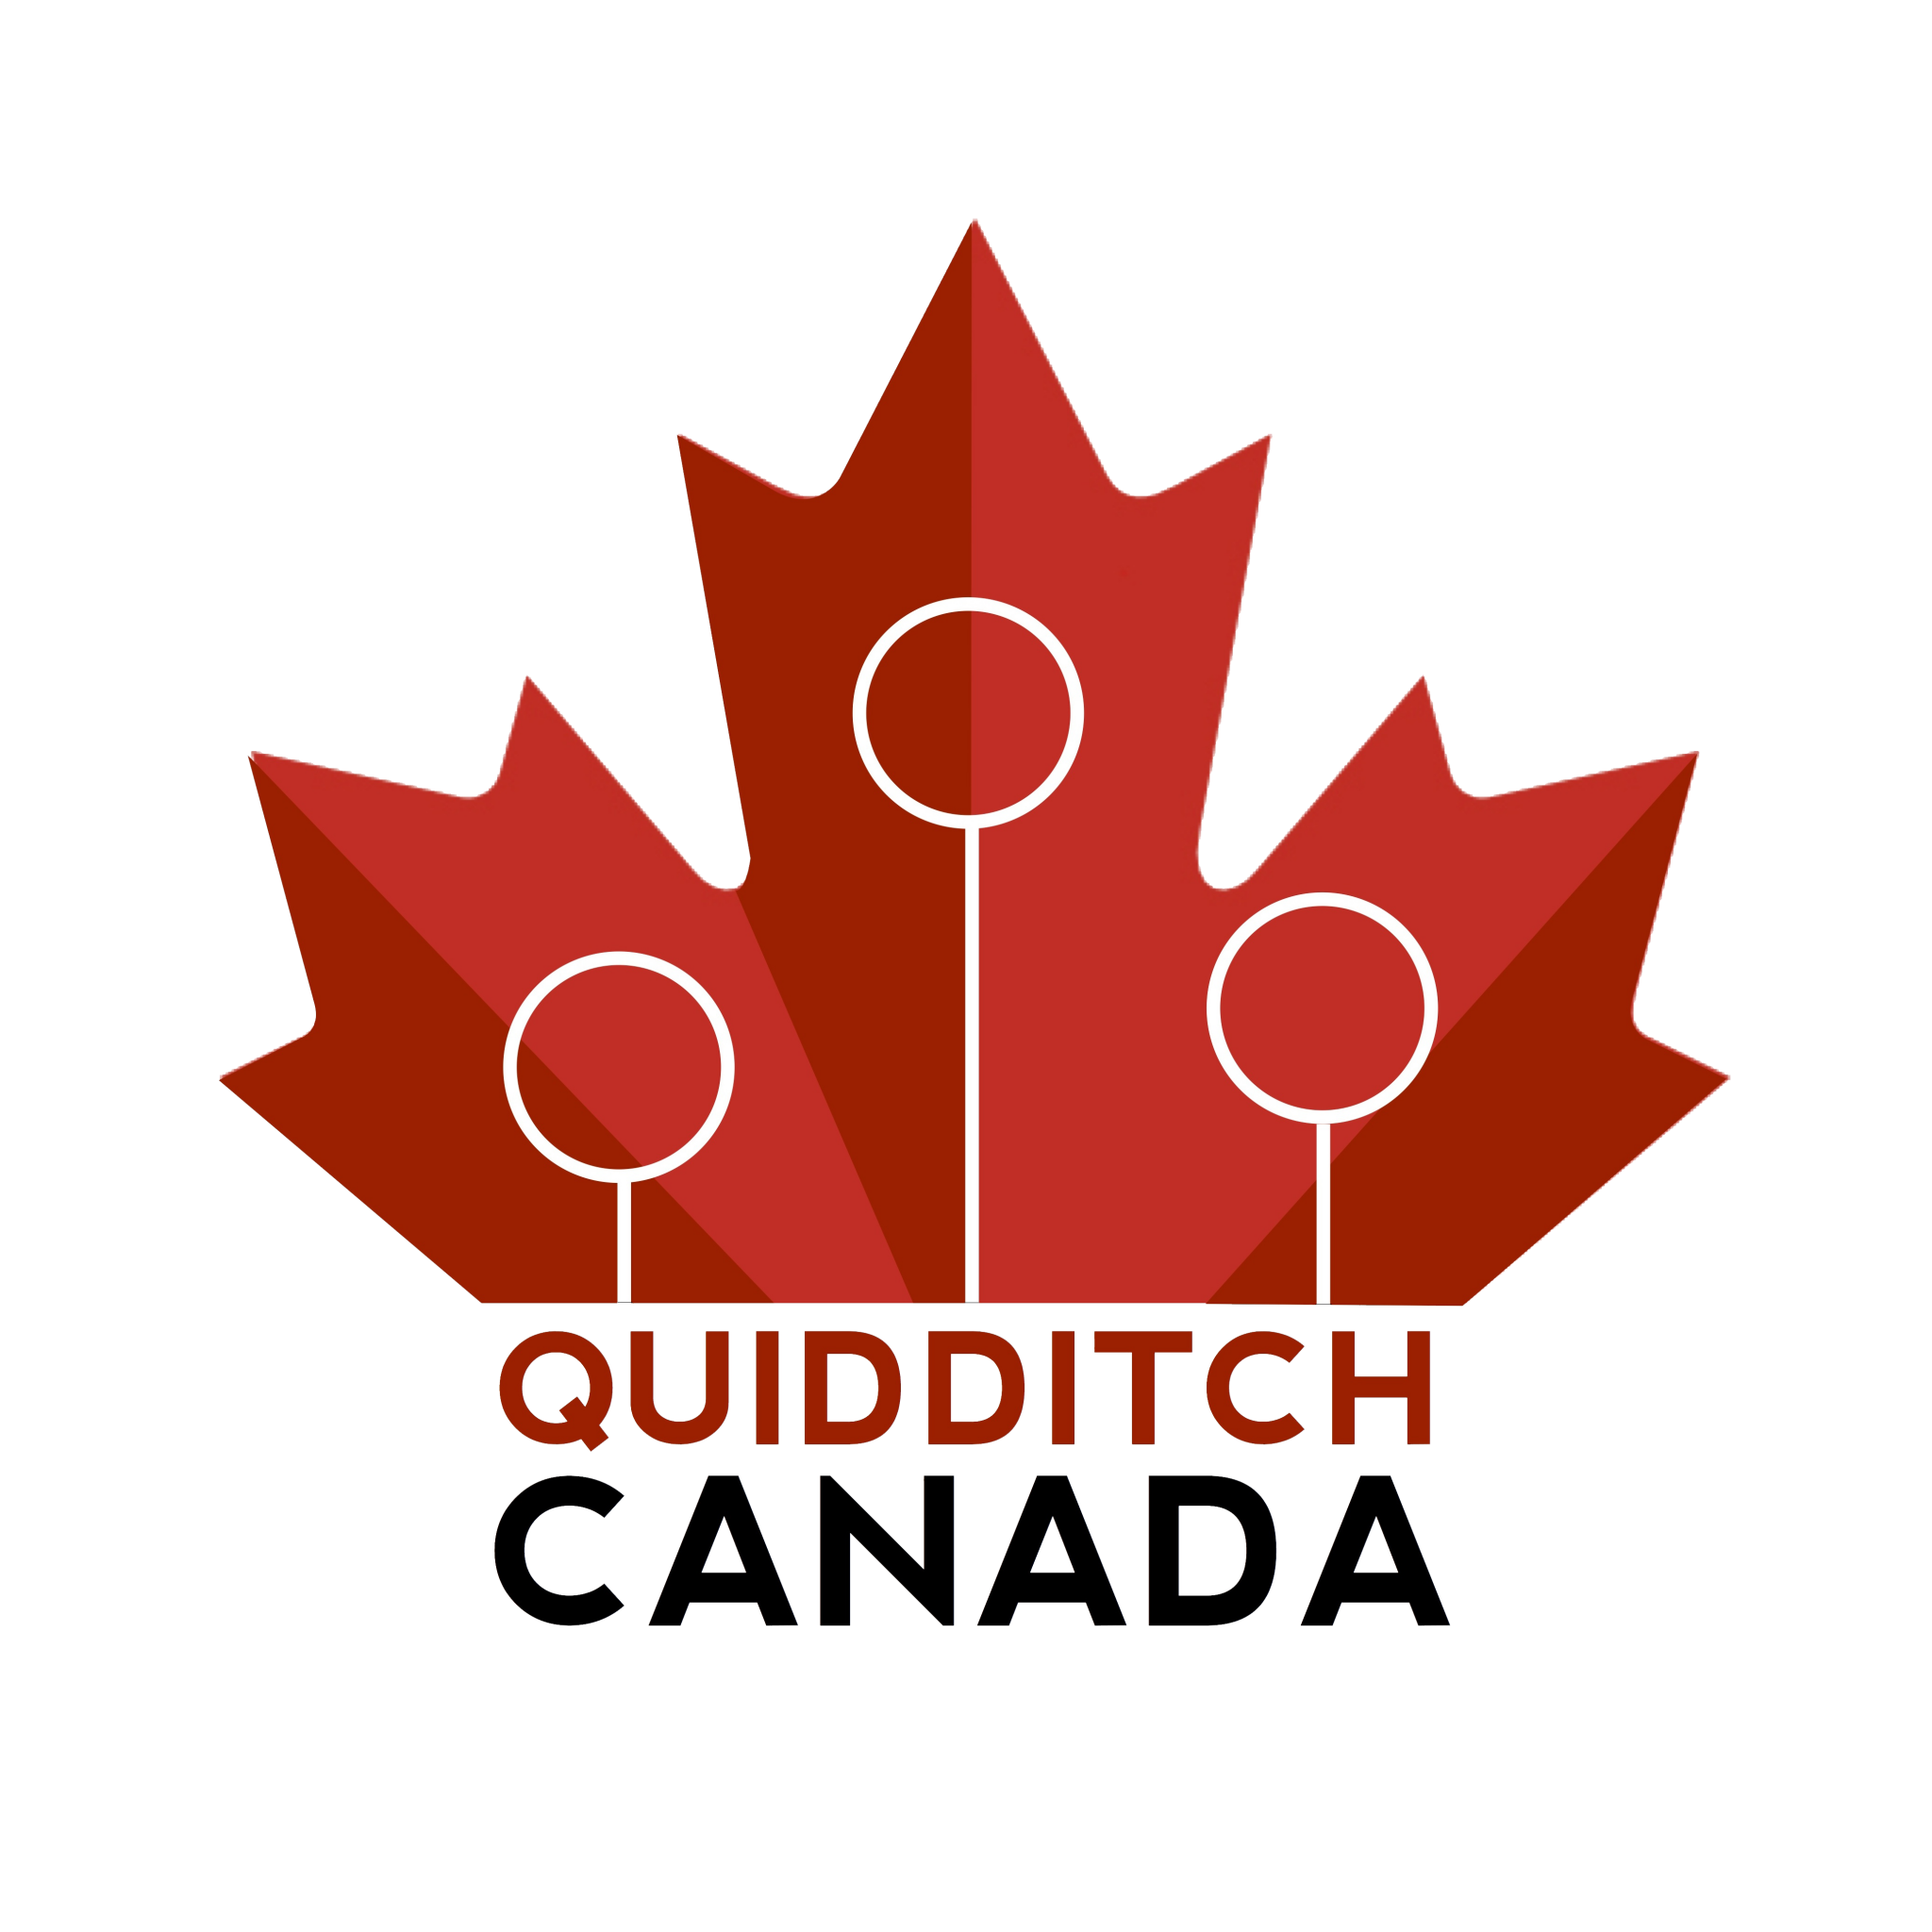 Quidditch Background posted by Ethan Tremblay